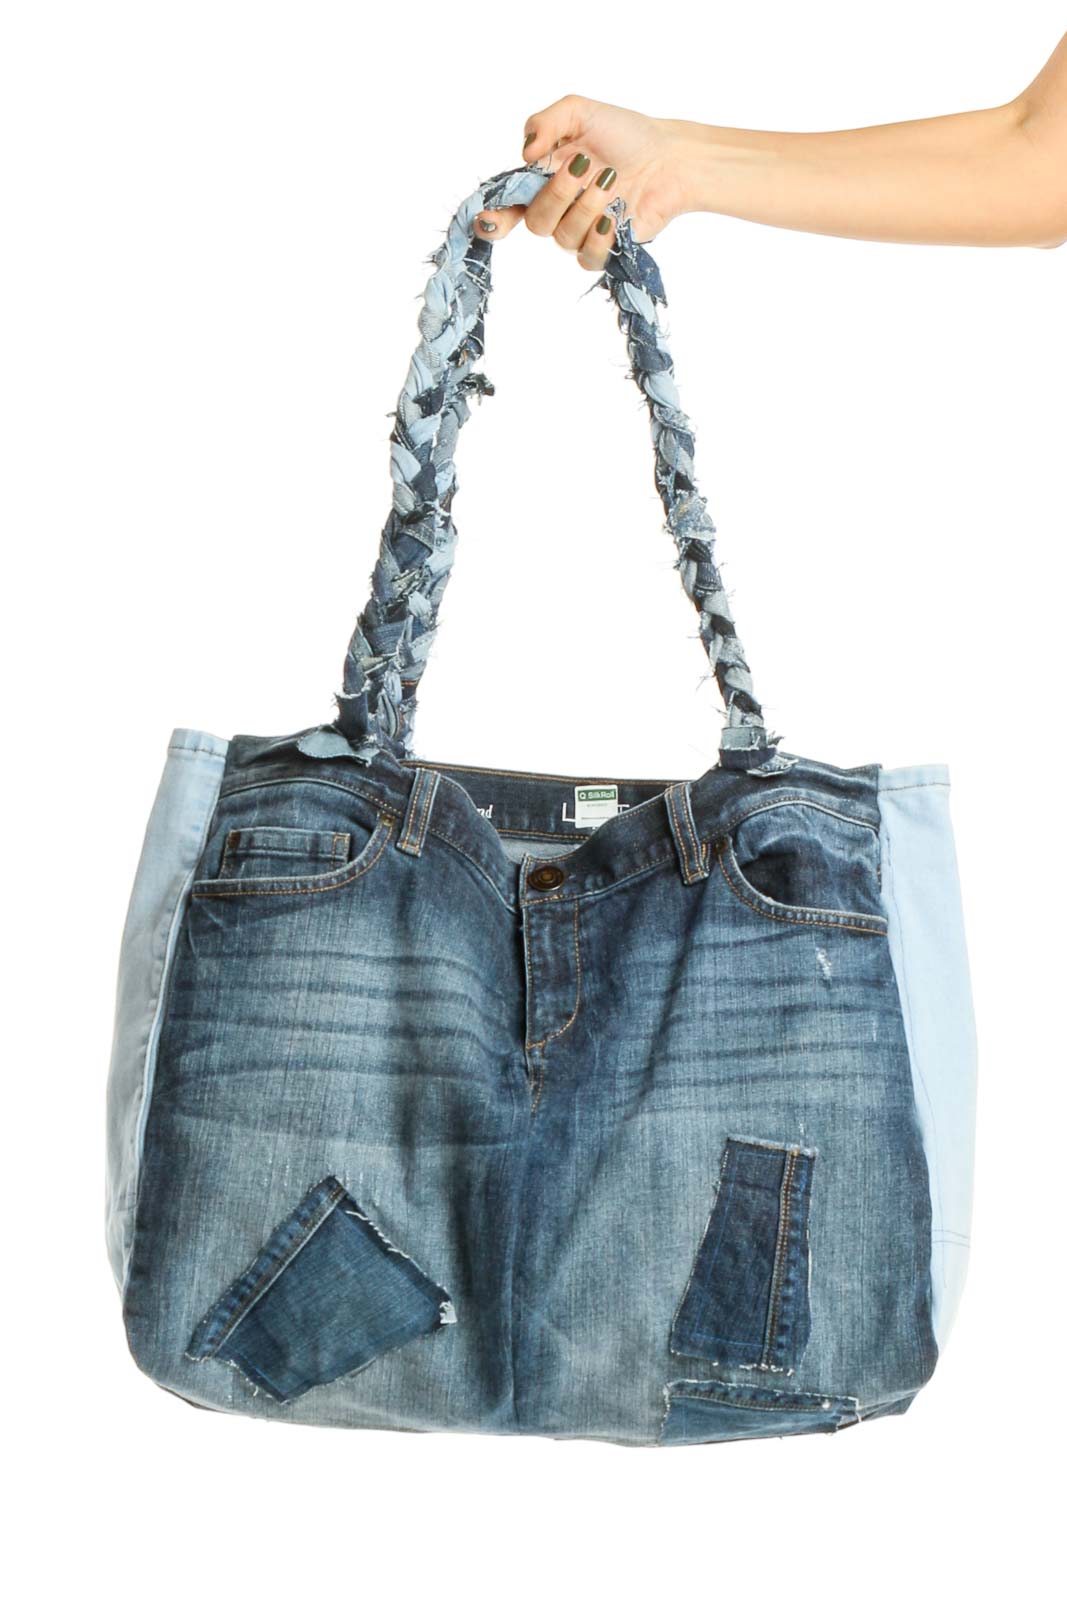 Reworked: Blue Denim Tote Bag with Side Pockets from Donated Denim Front